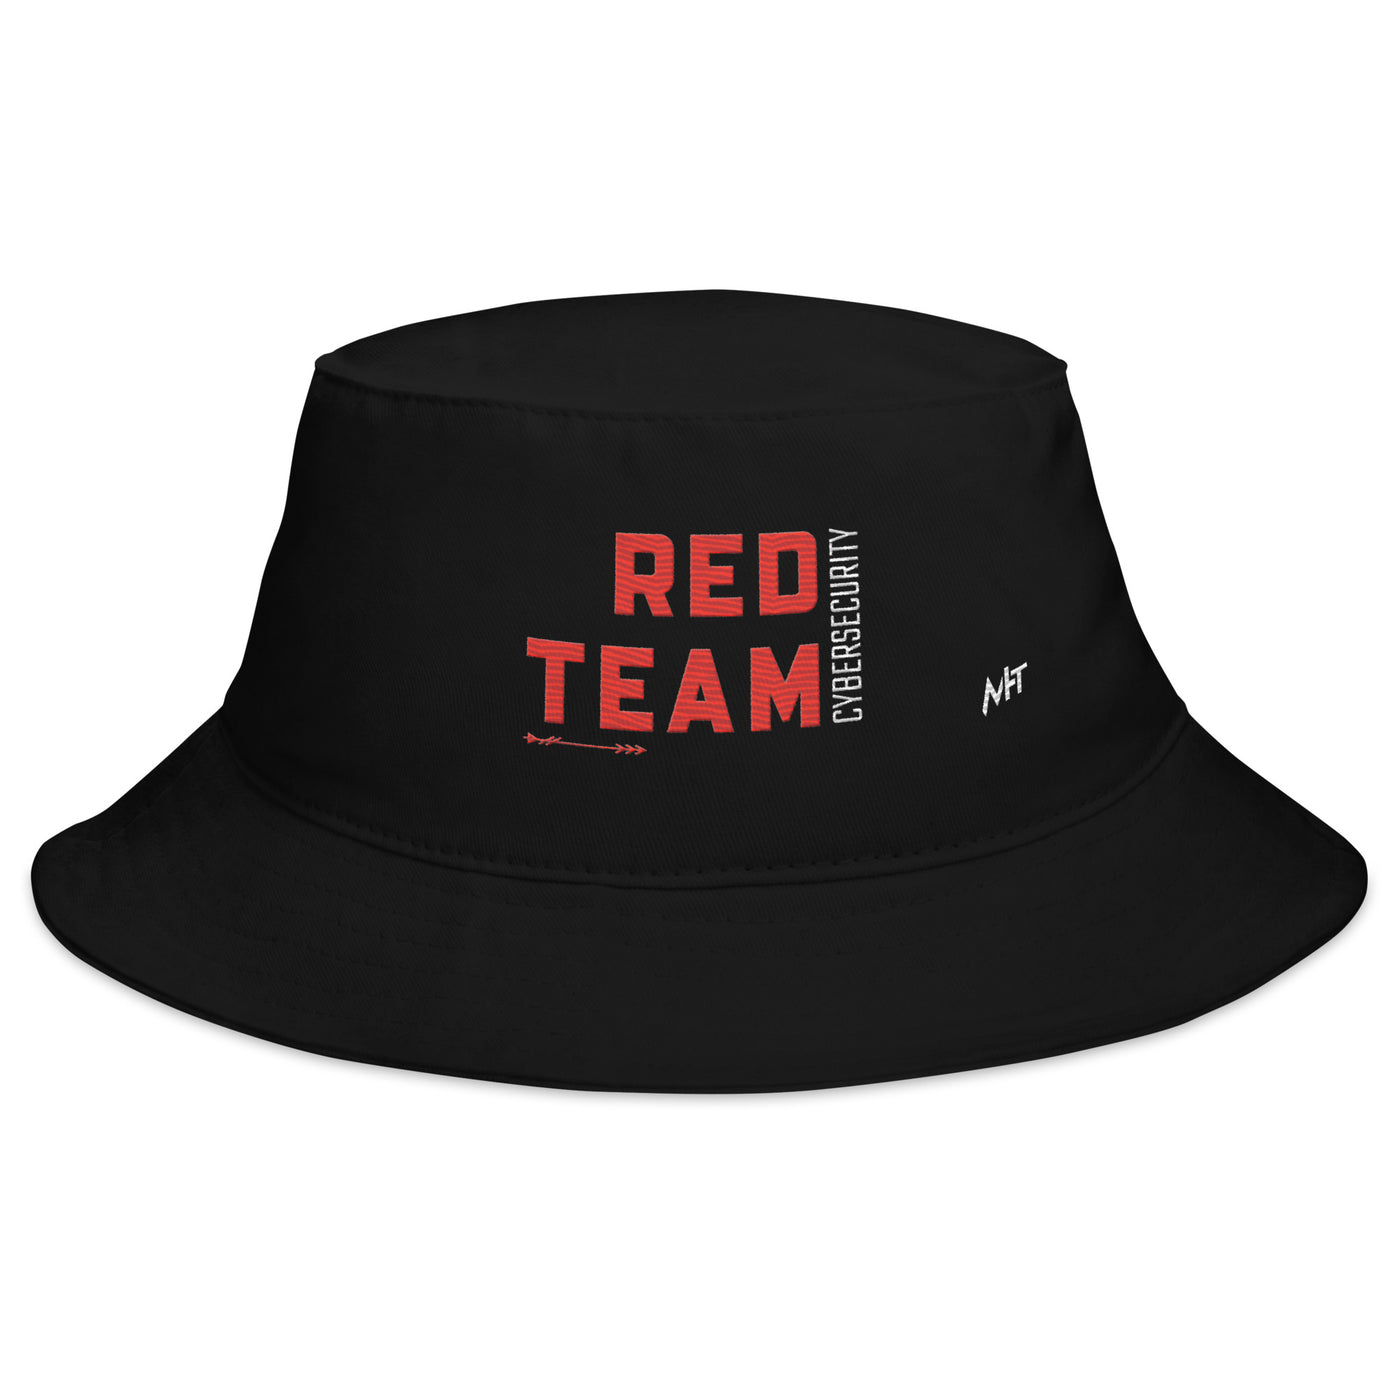 Cyber Security Red Team V8 - Bucket Hat